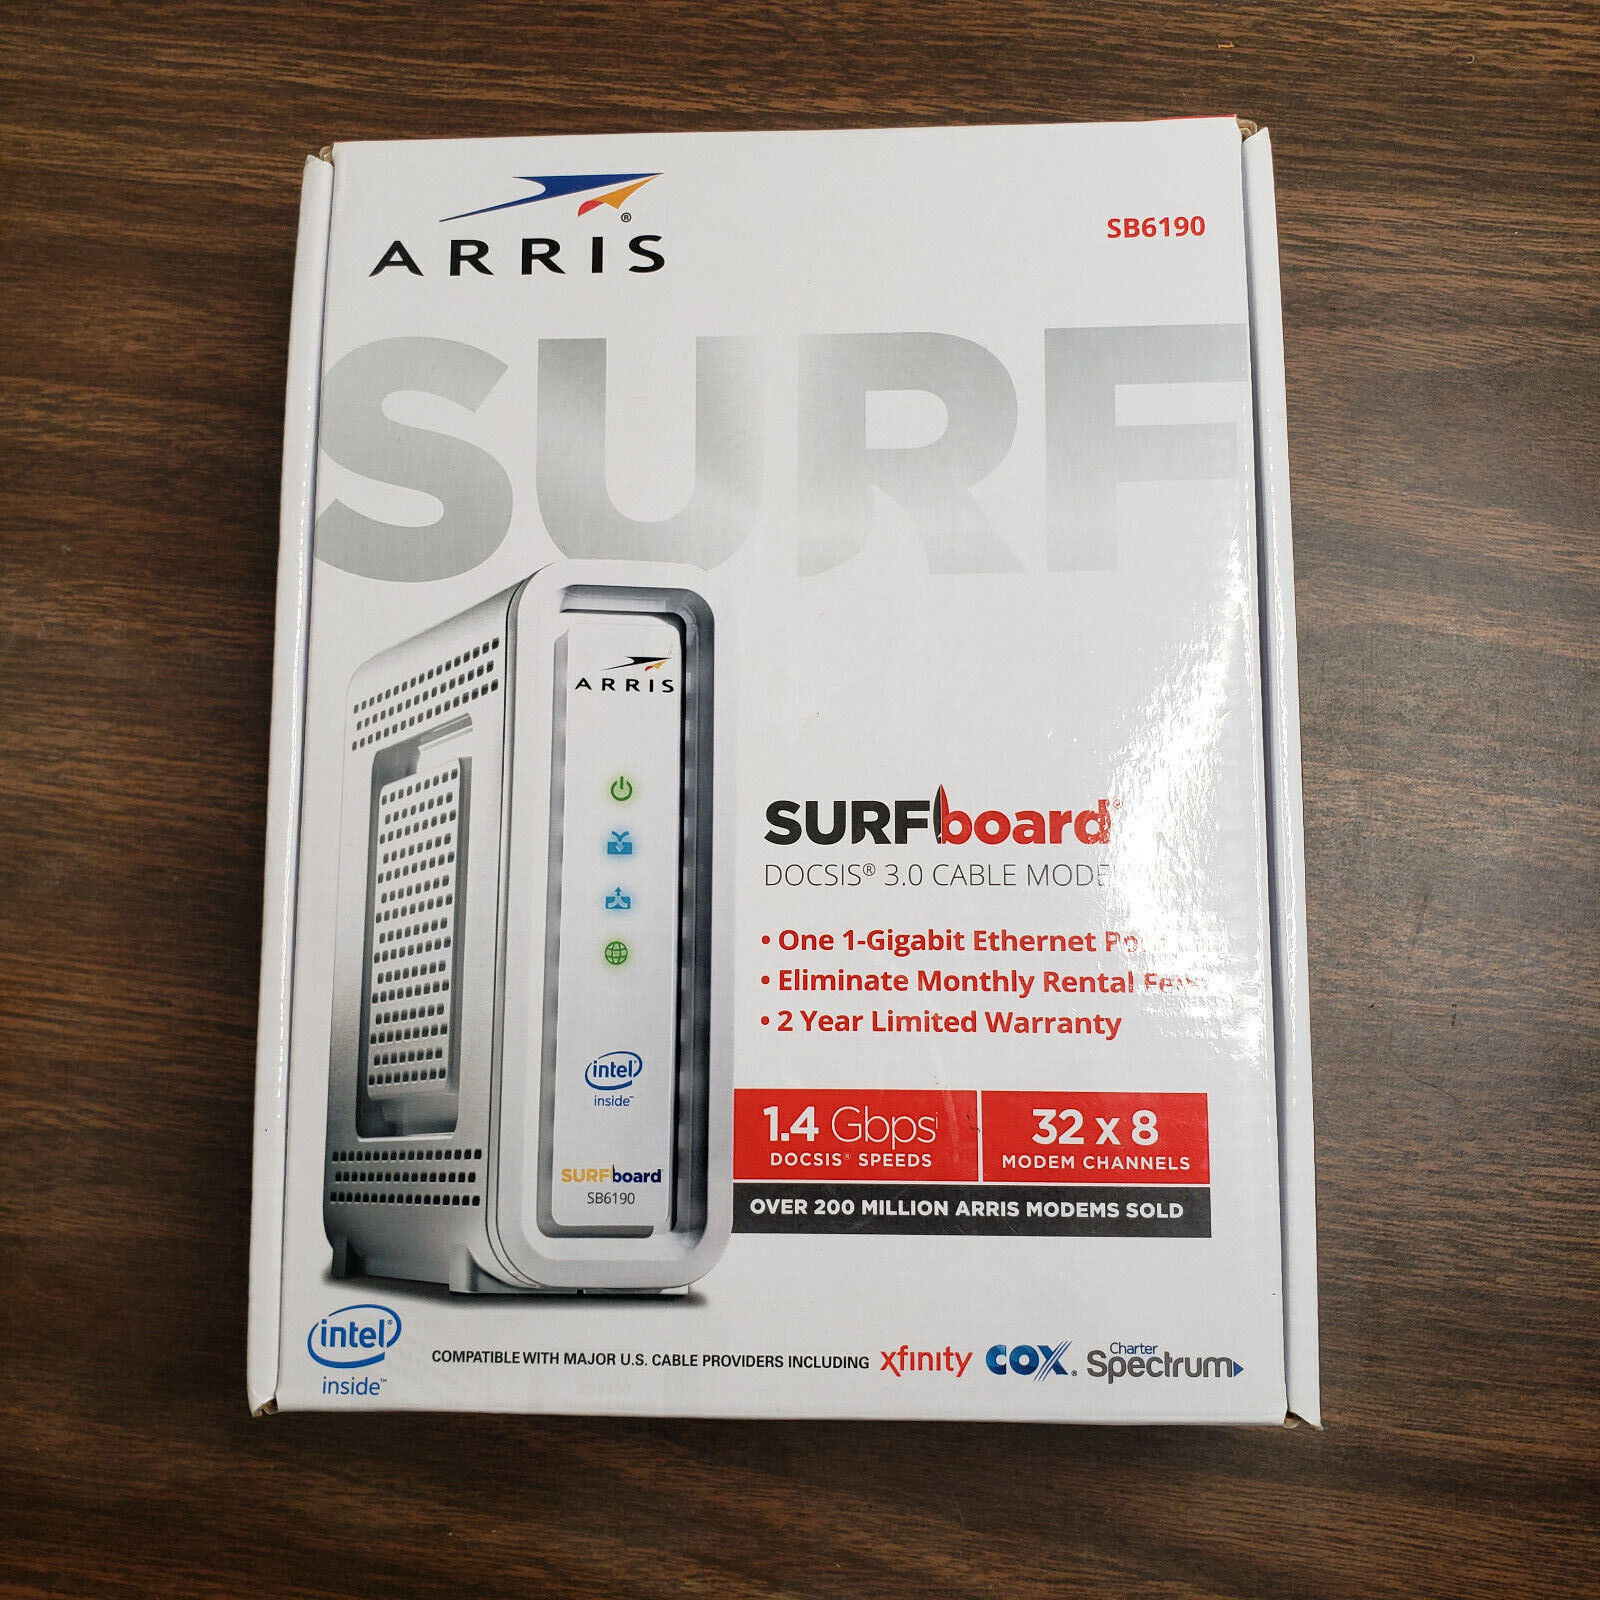 ARRIS SURF BOARD, 1.4 GBPS DOCSIS 3.0